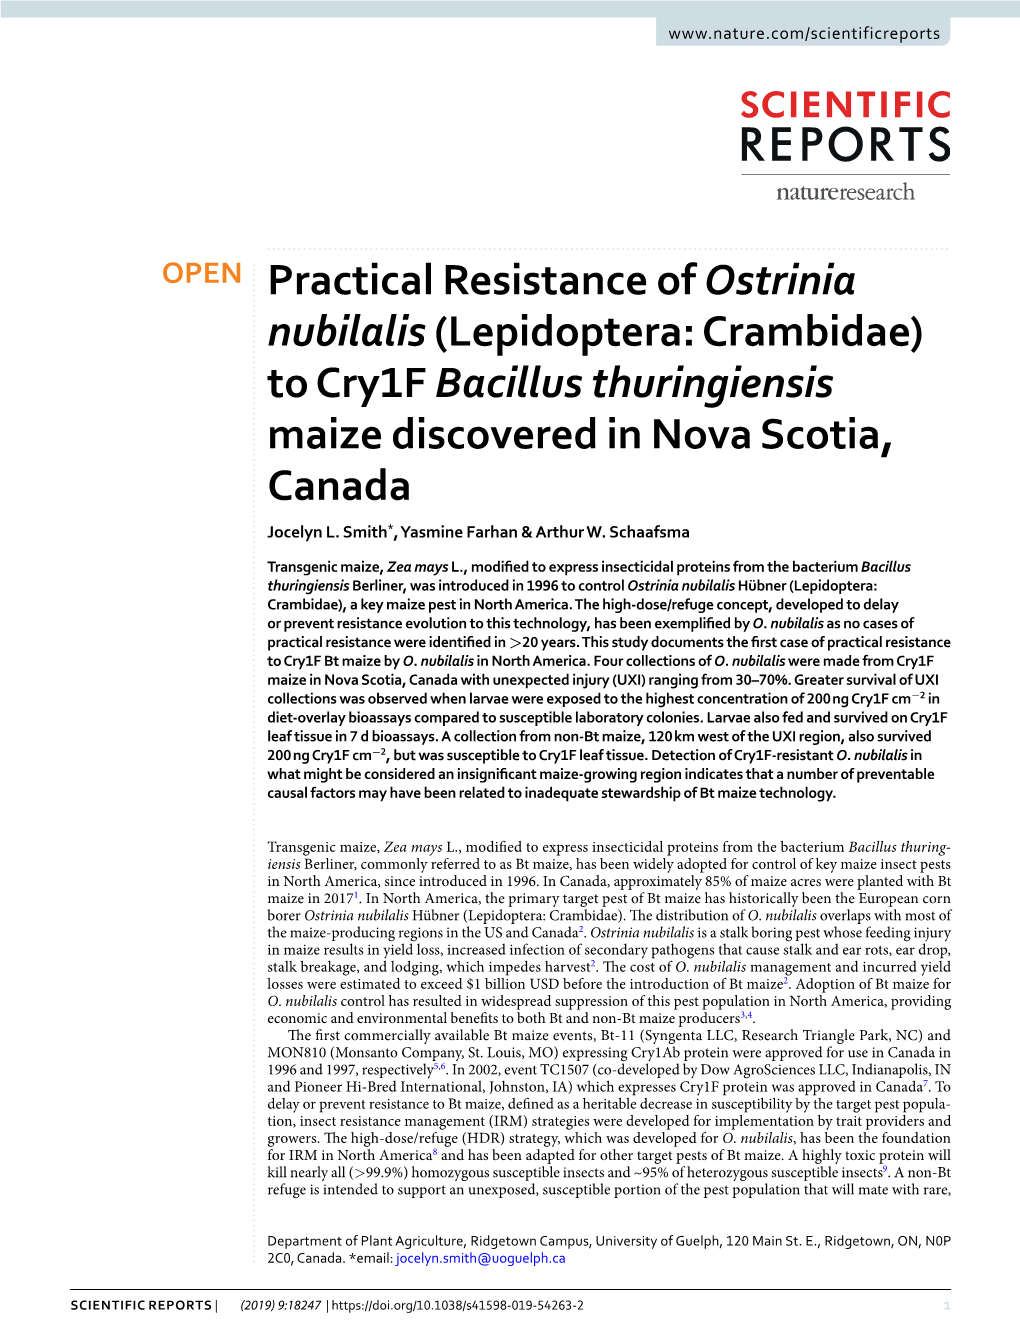 Practical Resistance of Ostrinia Nubilalis (Lepidoptera: Crambidae) to Cry1f Bacillus Thuringiensis Maize Discovered in Nova Scotia, Canada Jocelyn L